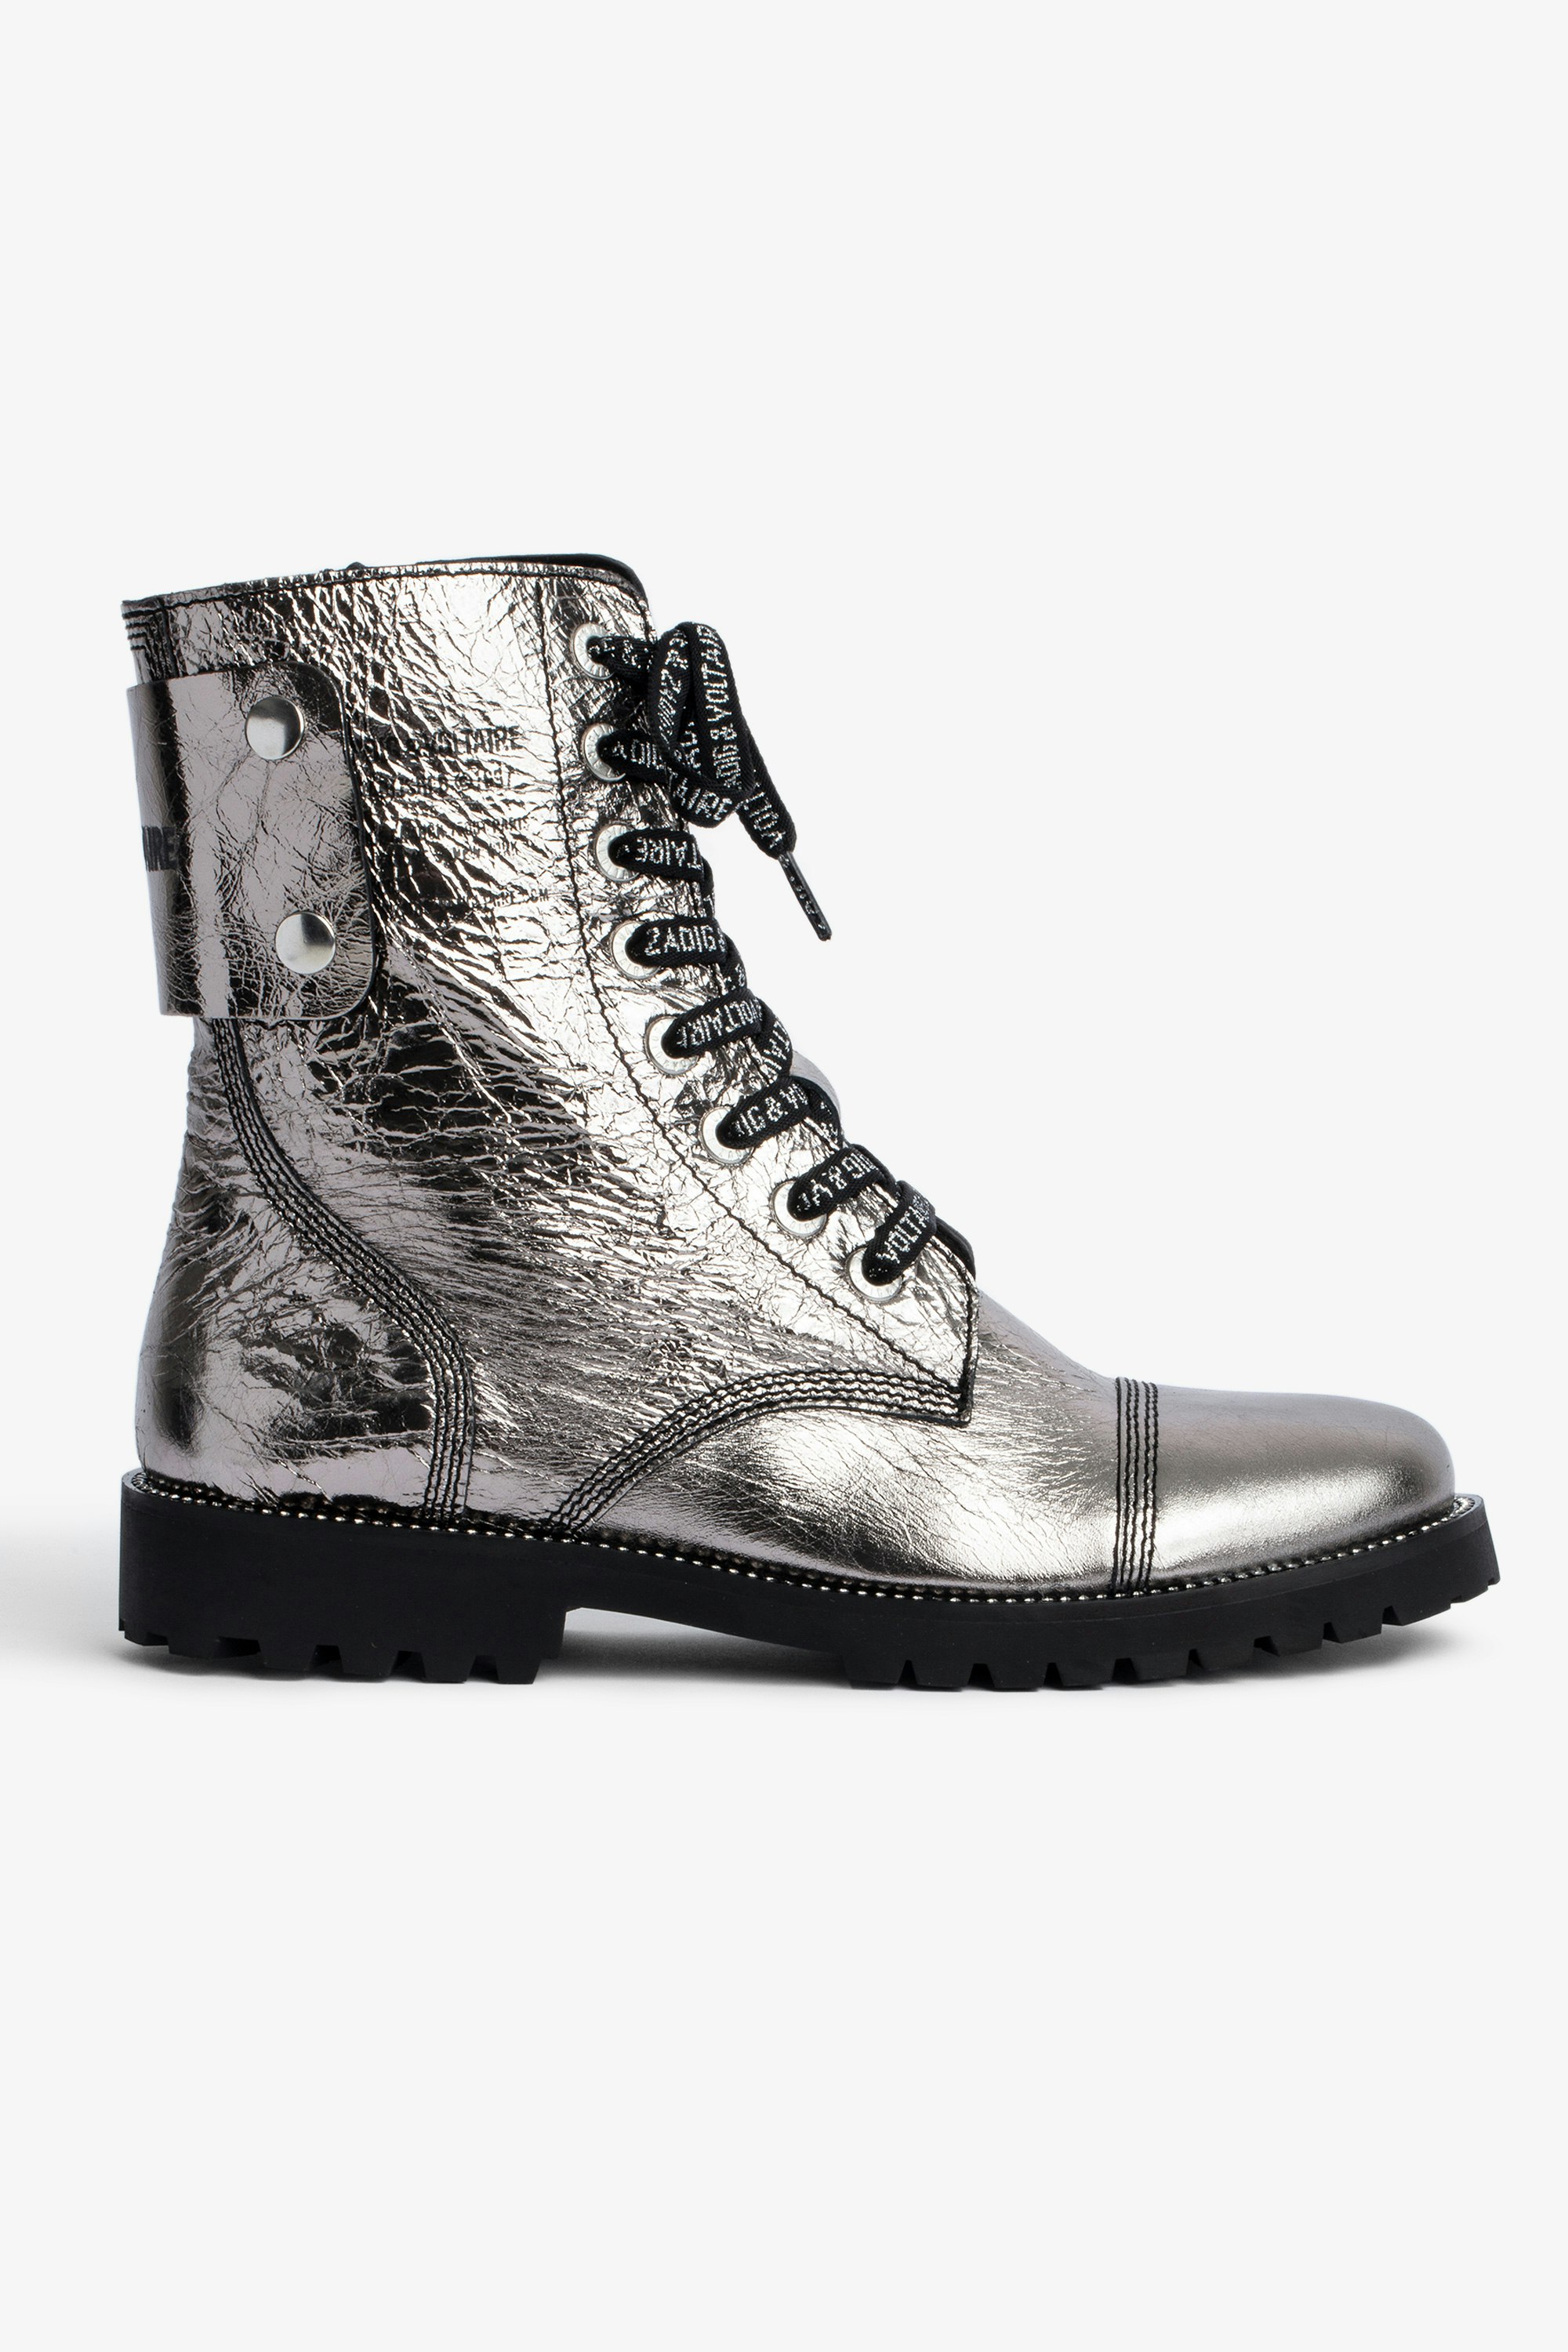 Joe ビンテージ Metal Ankle ブーツ Women's mid-calf boots in silver vintage leather